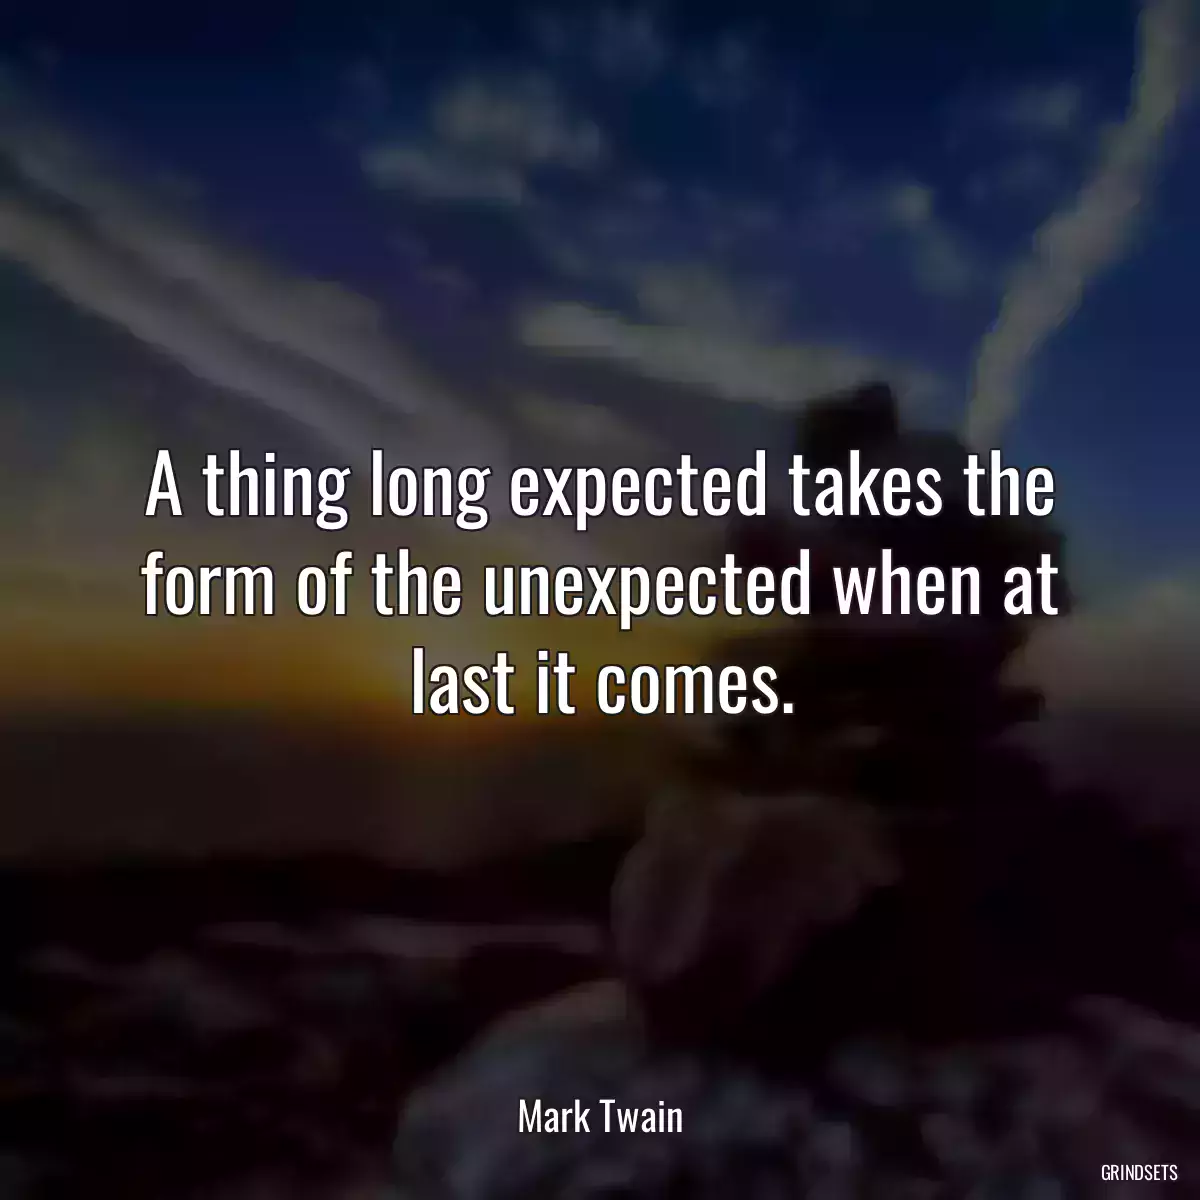 A thing long expected takes the form of the unexpected when at last it comes.